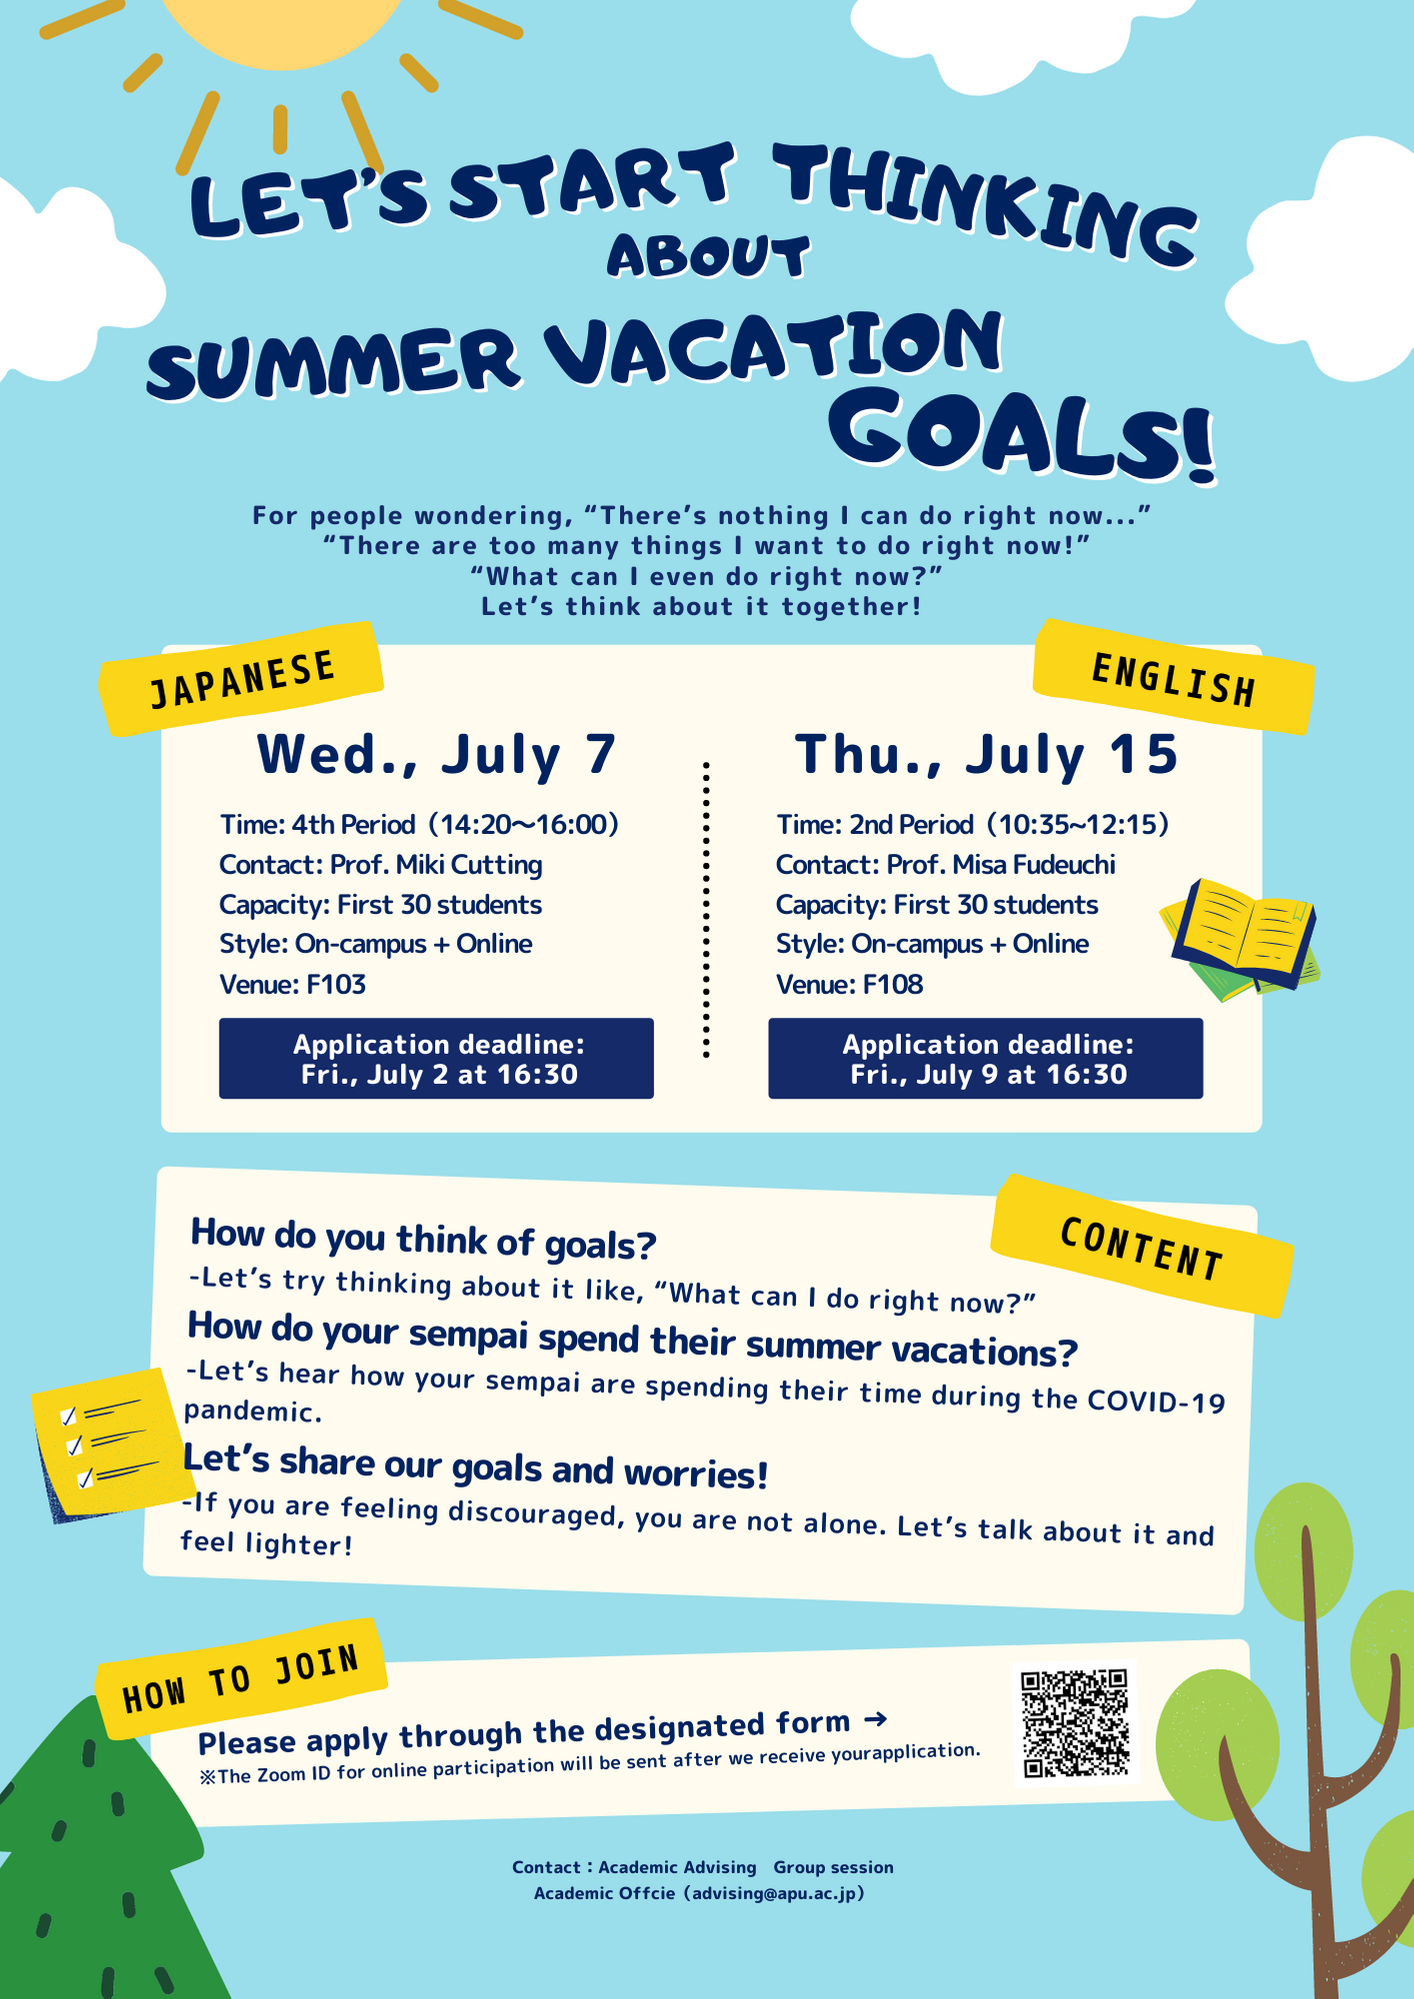 Let’s start thinking about Summer Vacation Goals（Spring Semester）